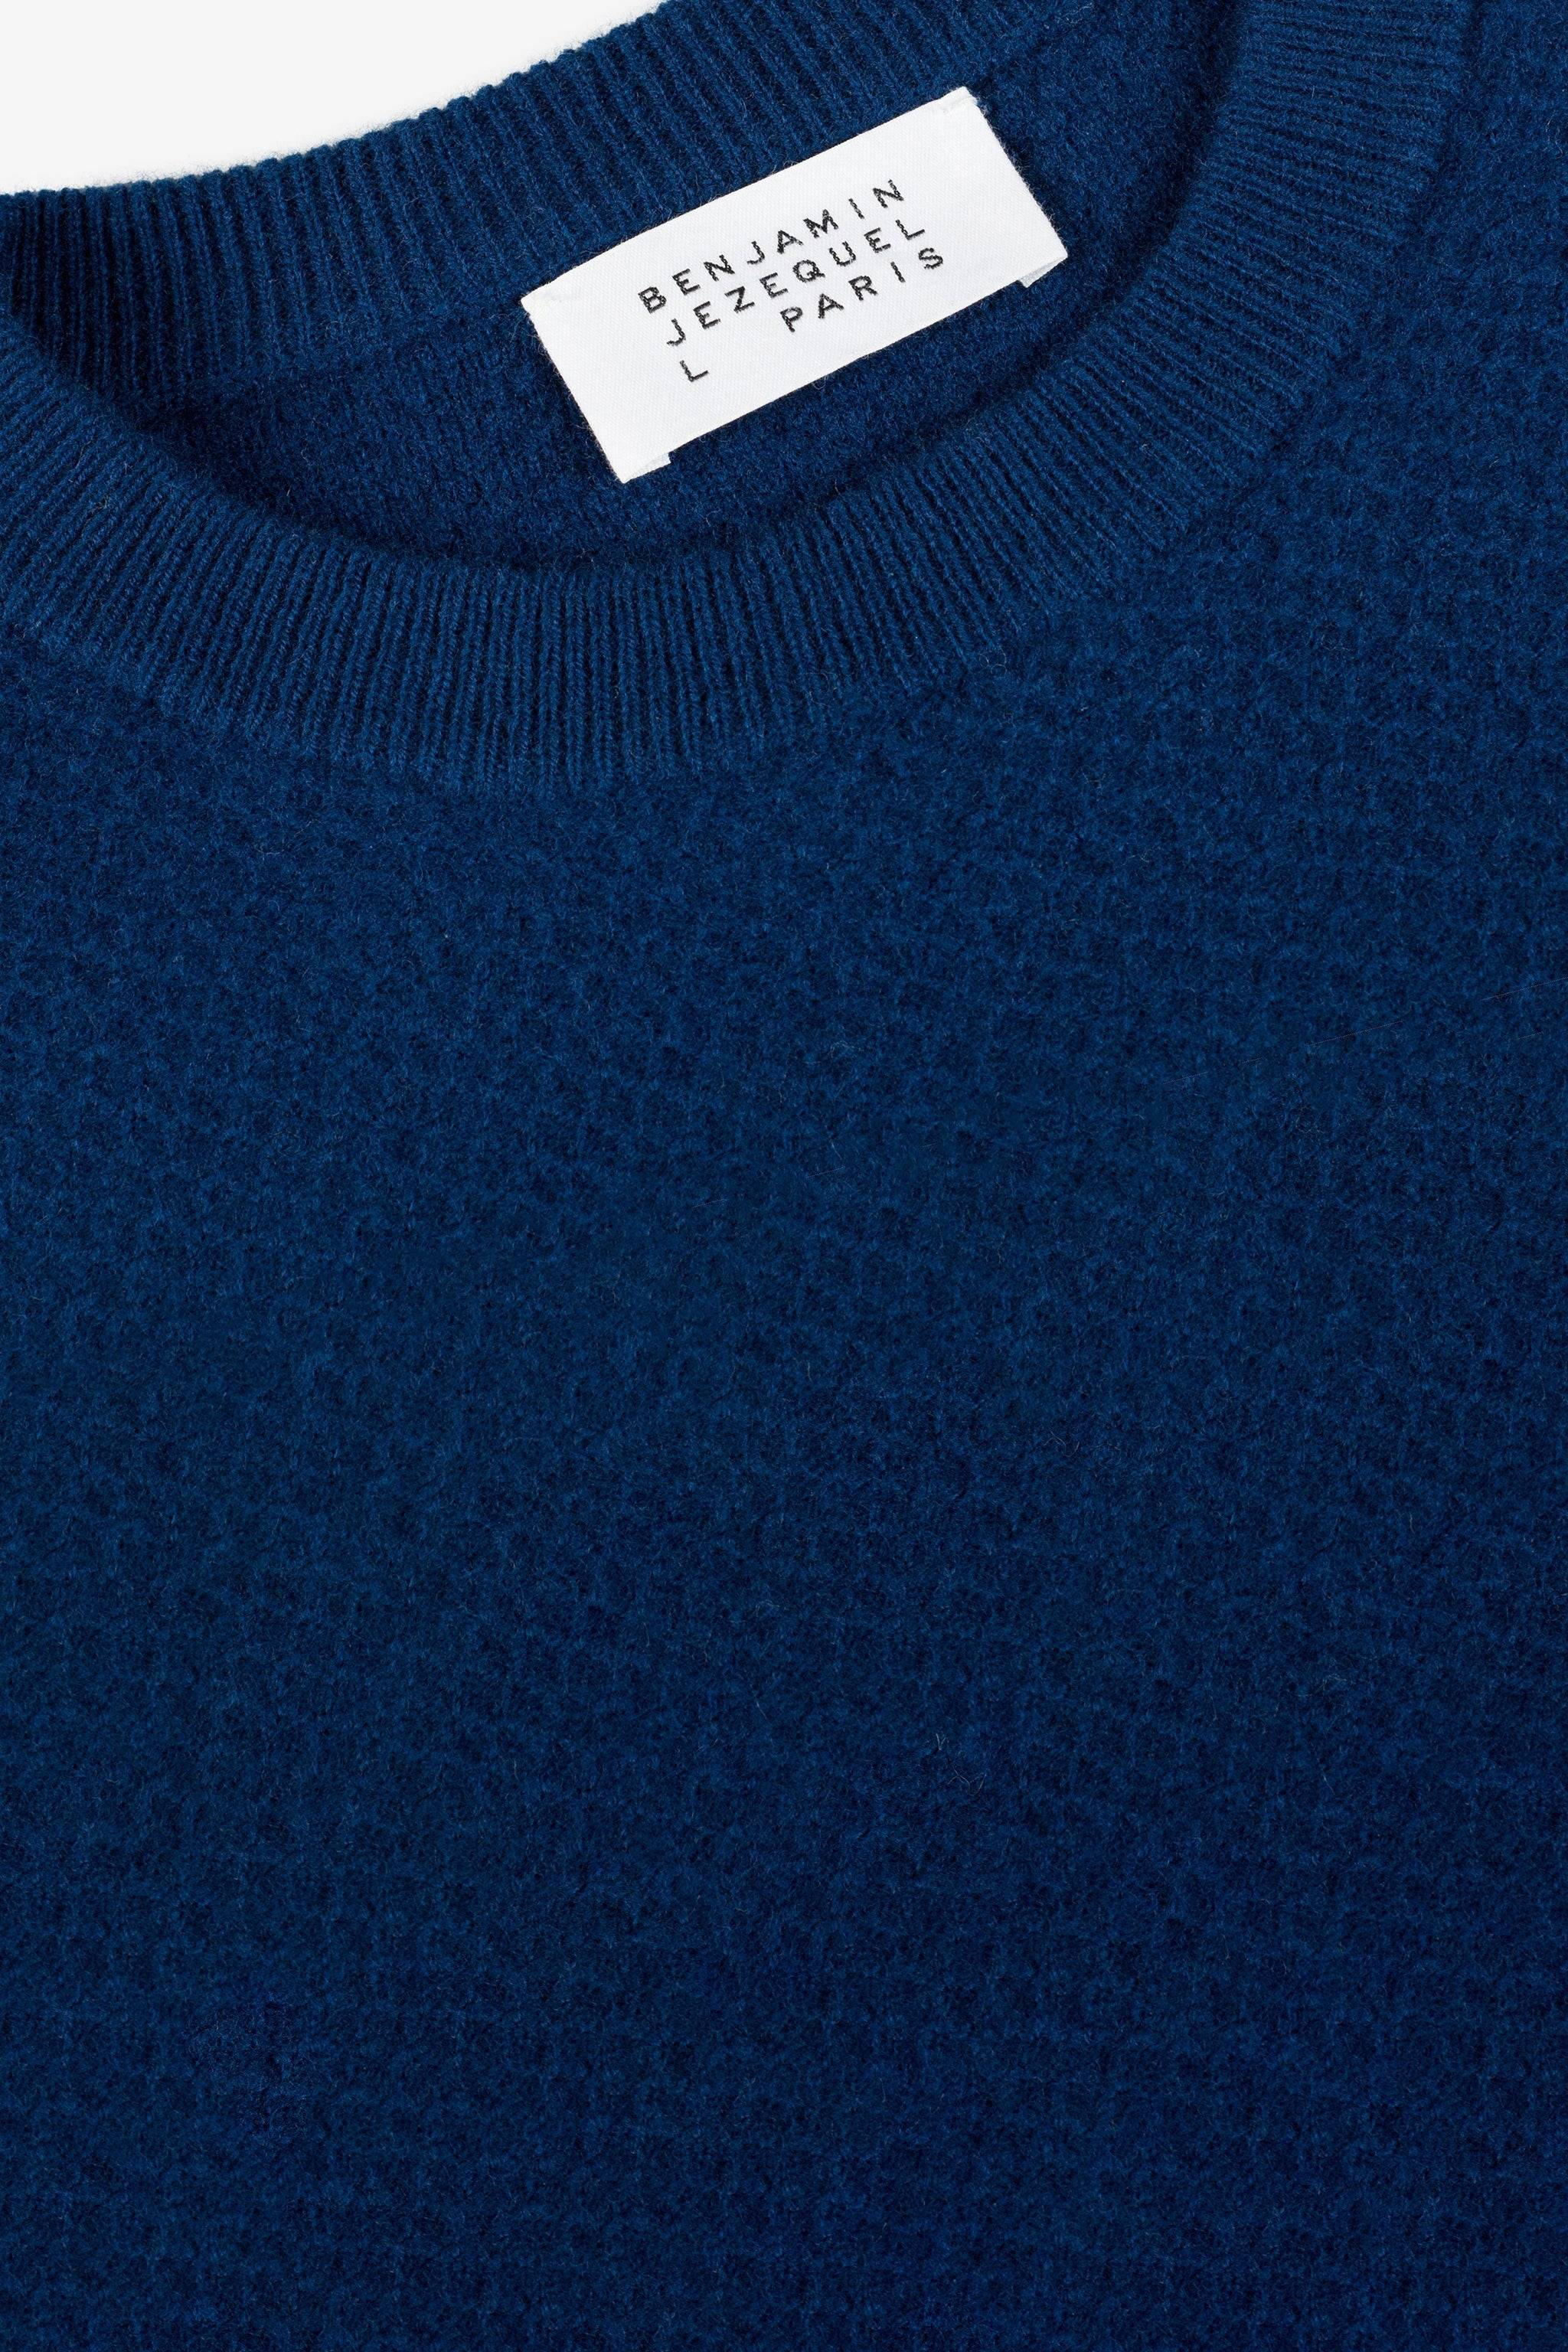 a blue sweater with a label on it